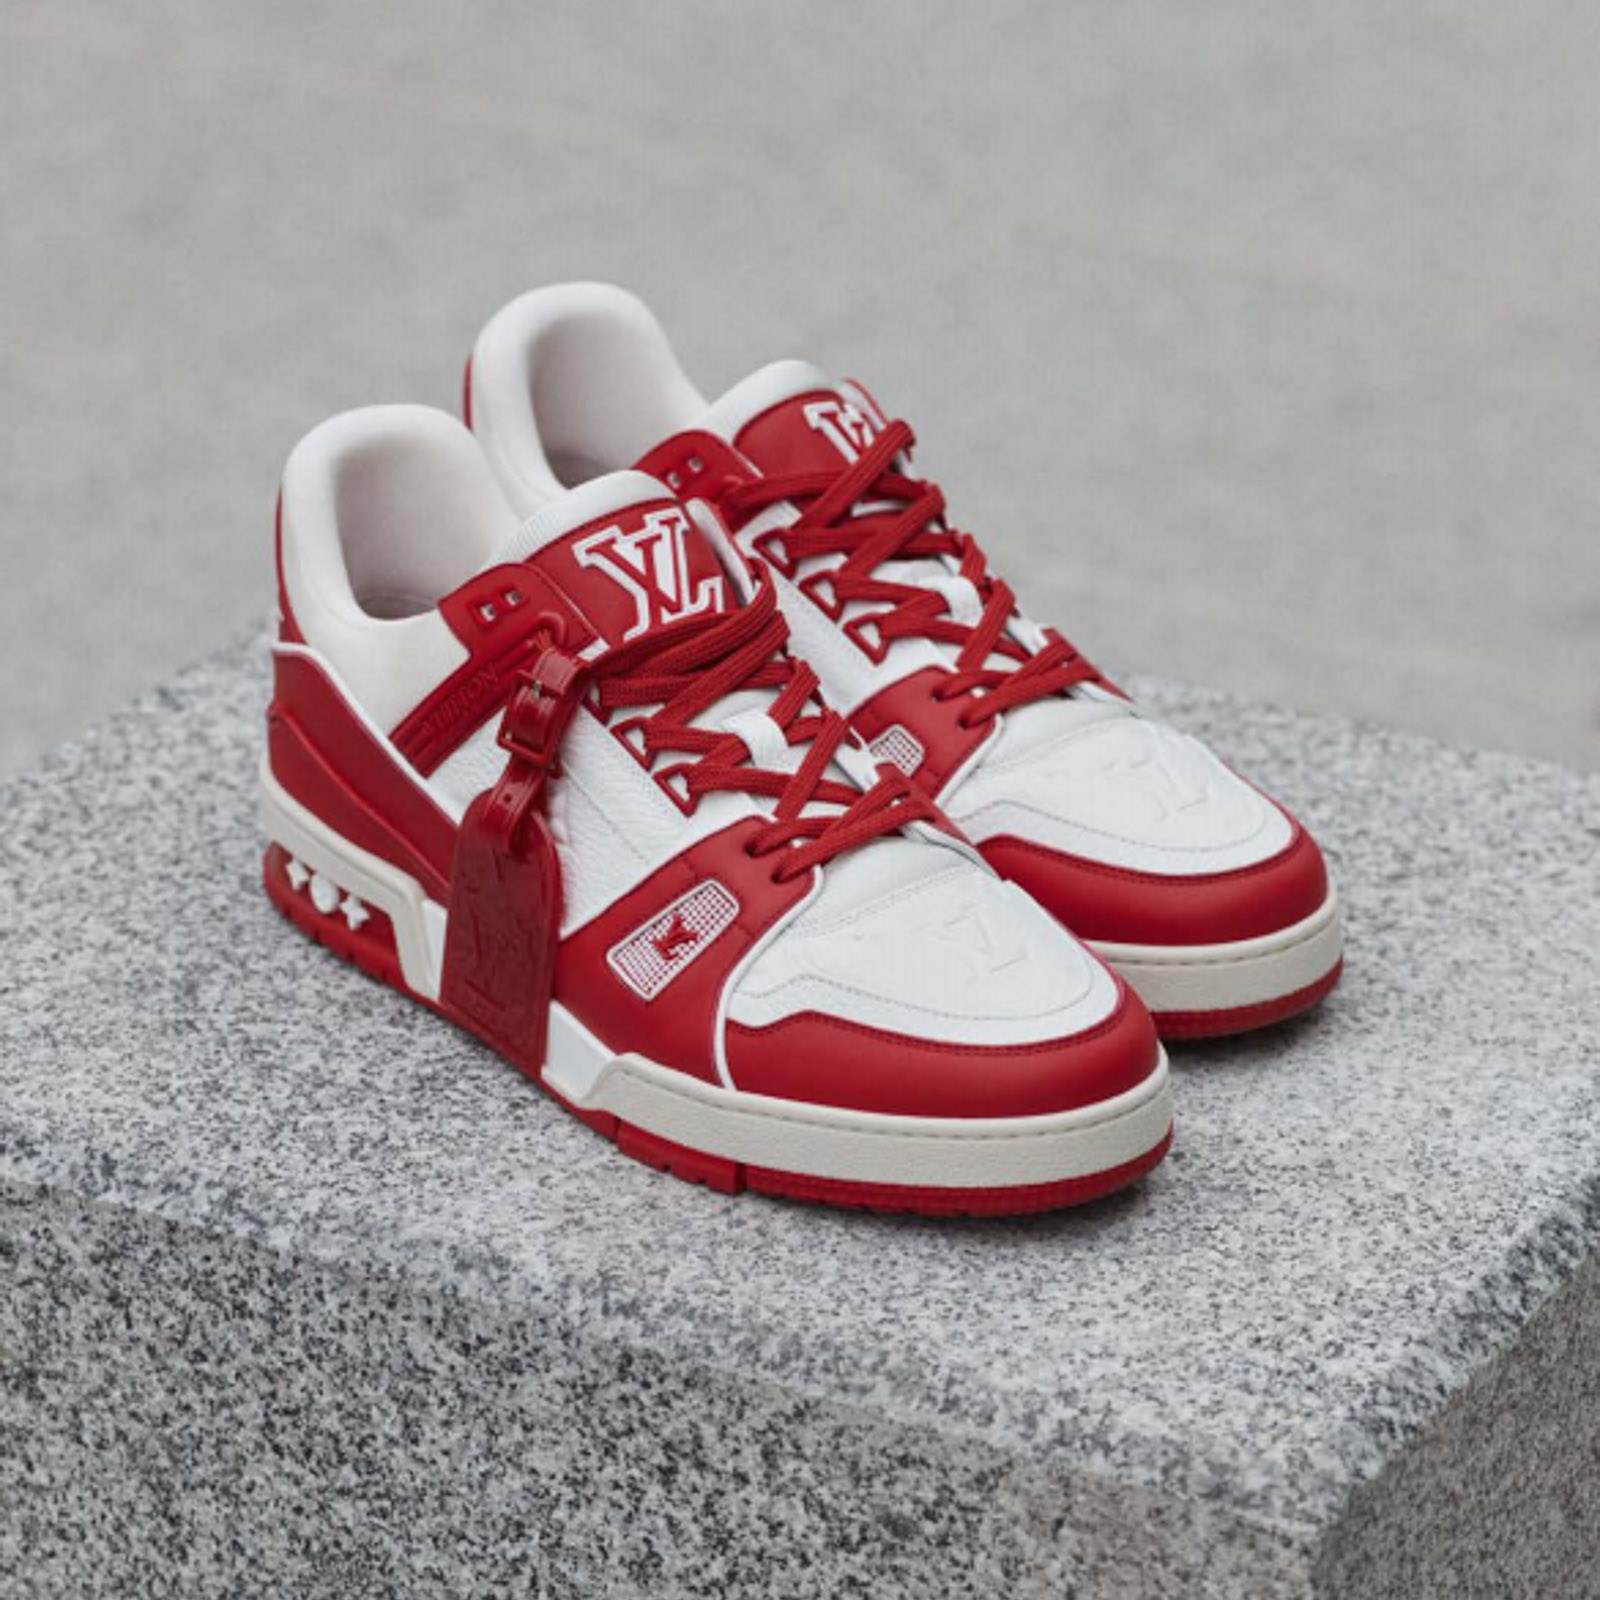 Louis Vuitton Launches Trainer With Red for AIDS Fund – WWD